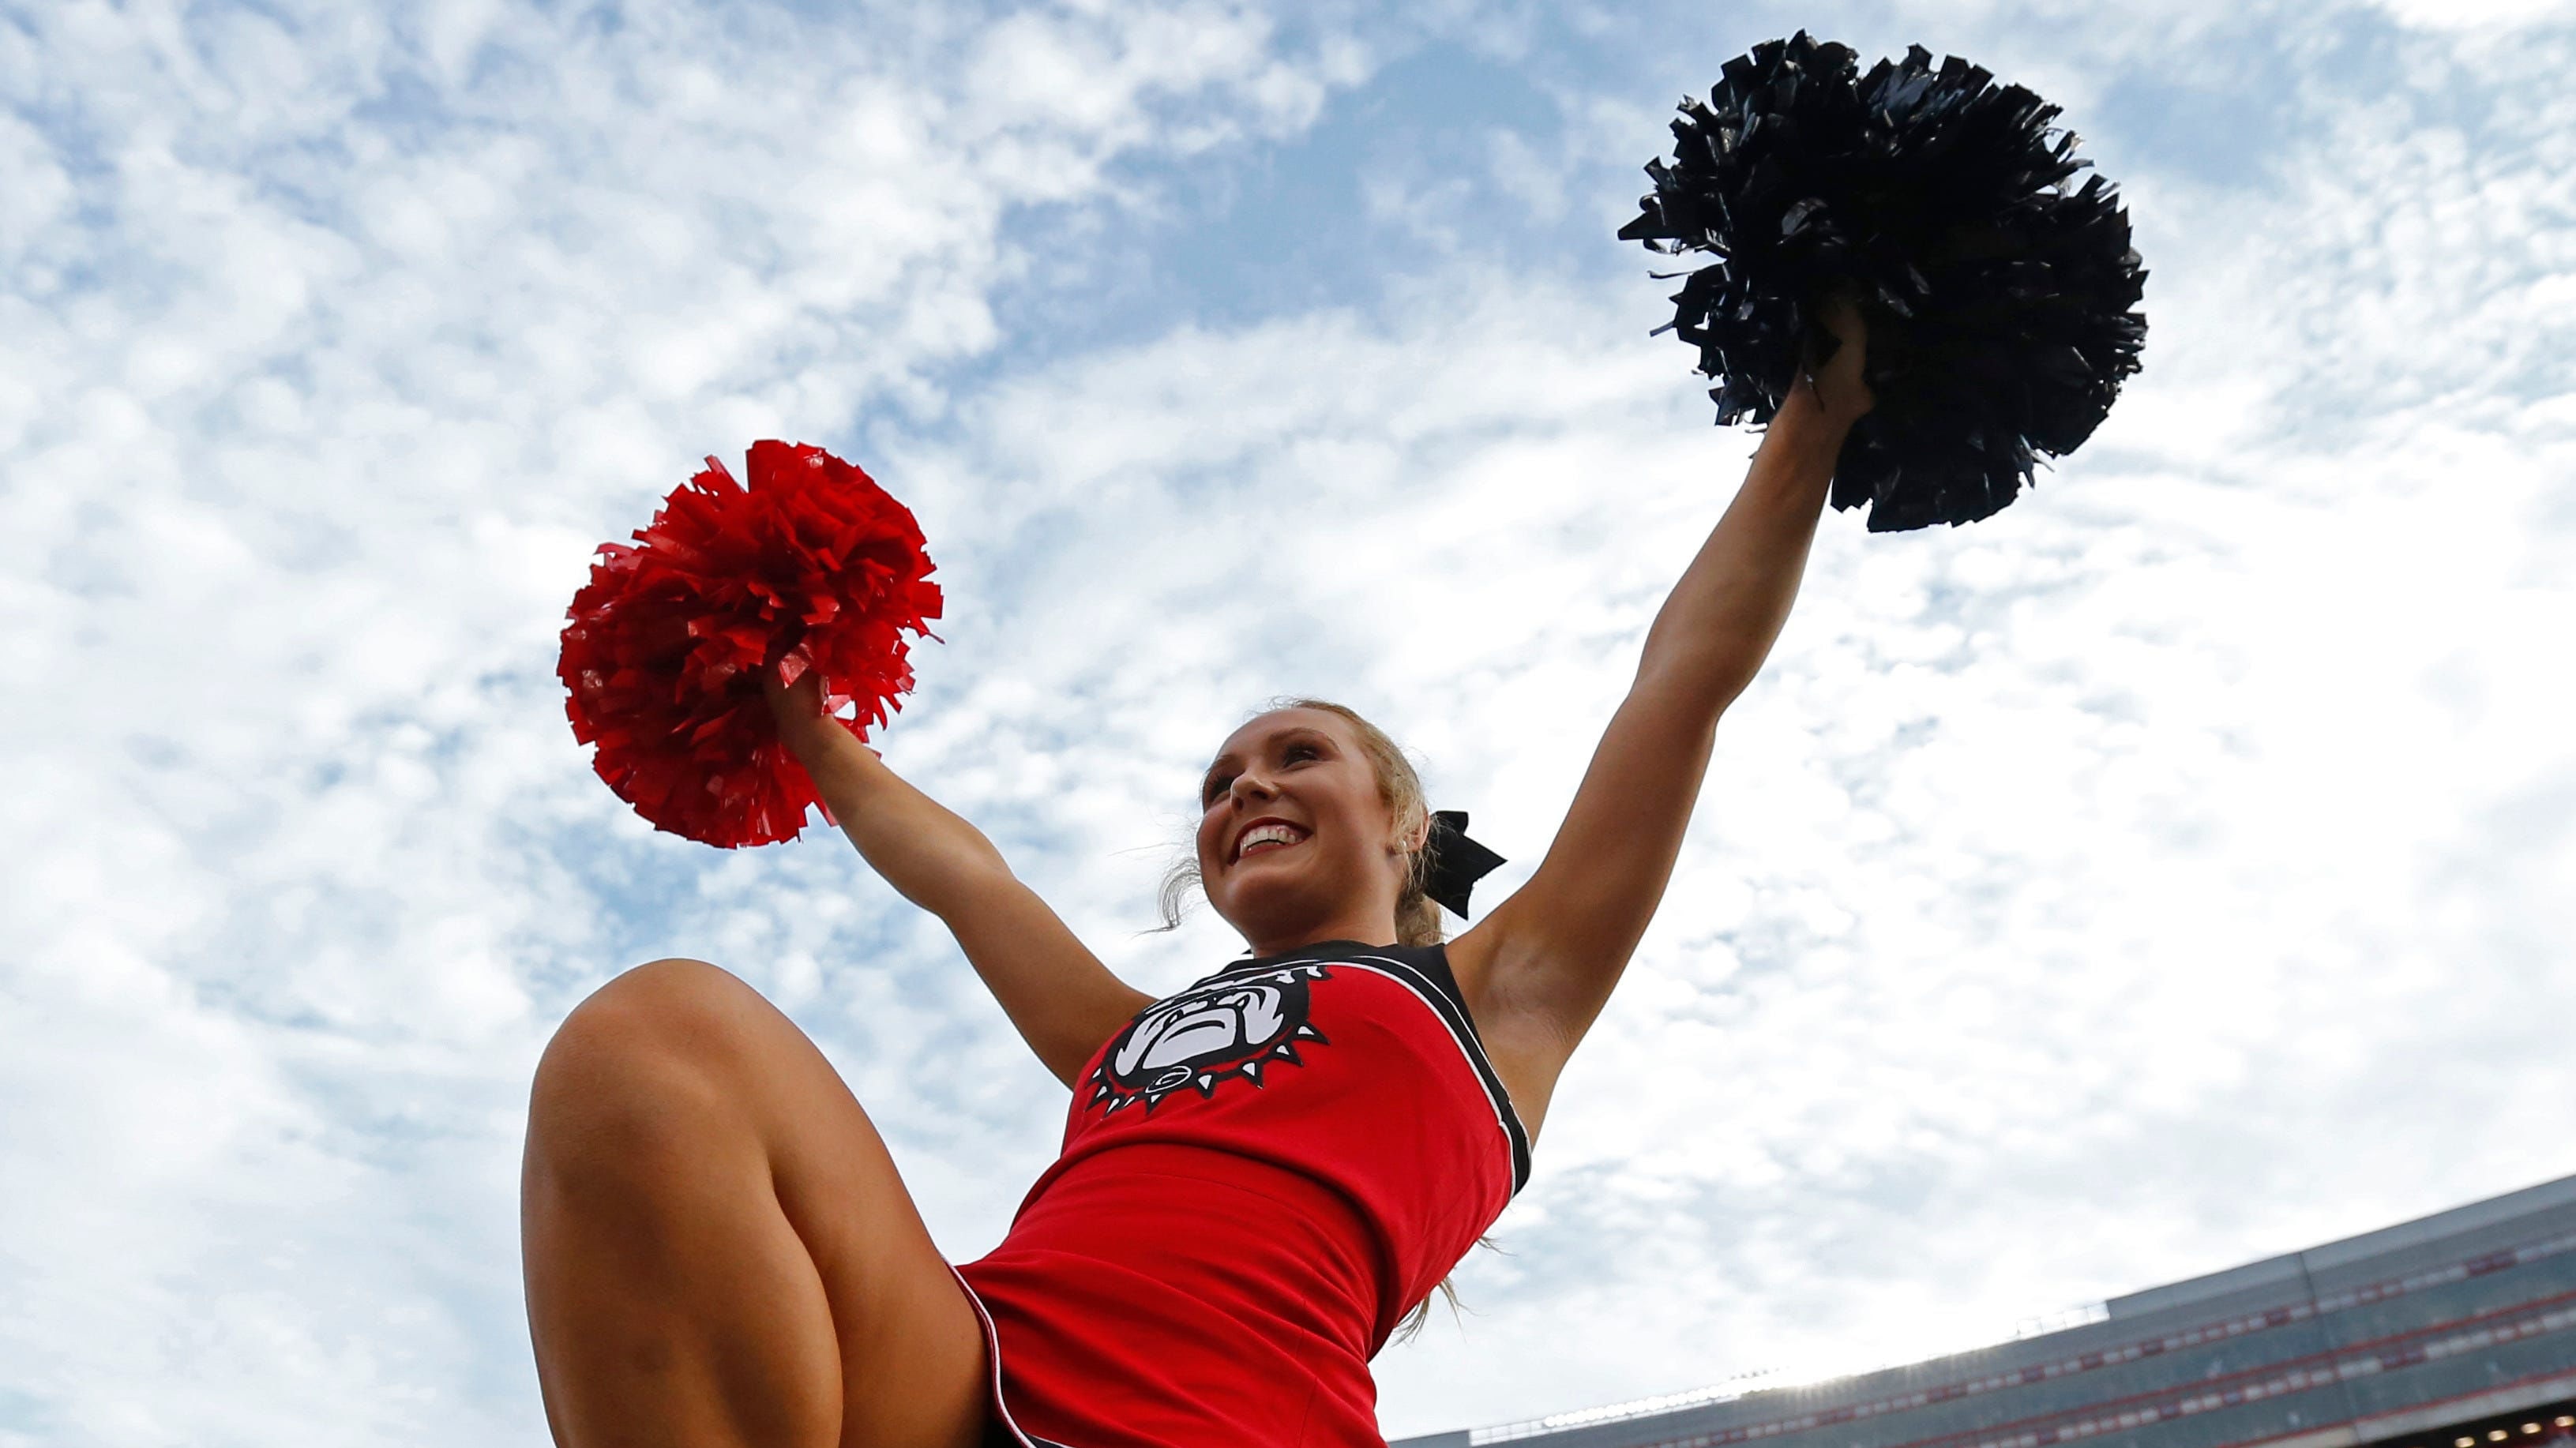 Georgia Bulldogs cheerleader performs during a college football game in the SEC.